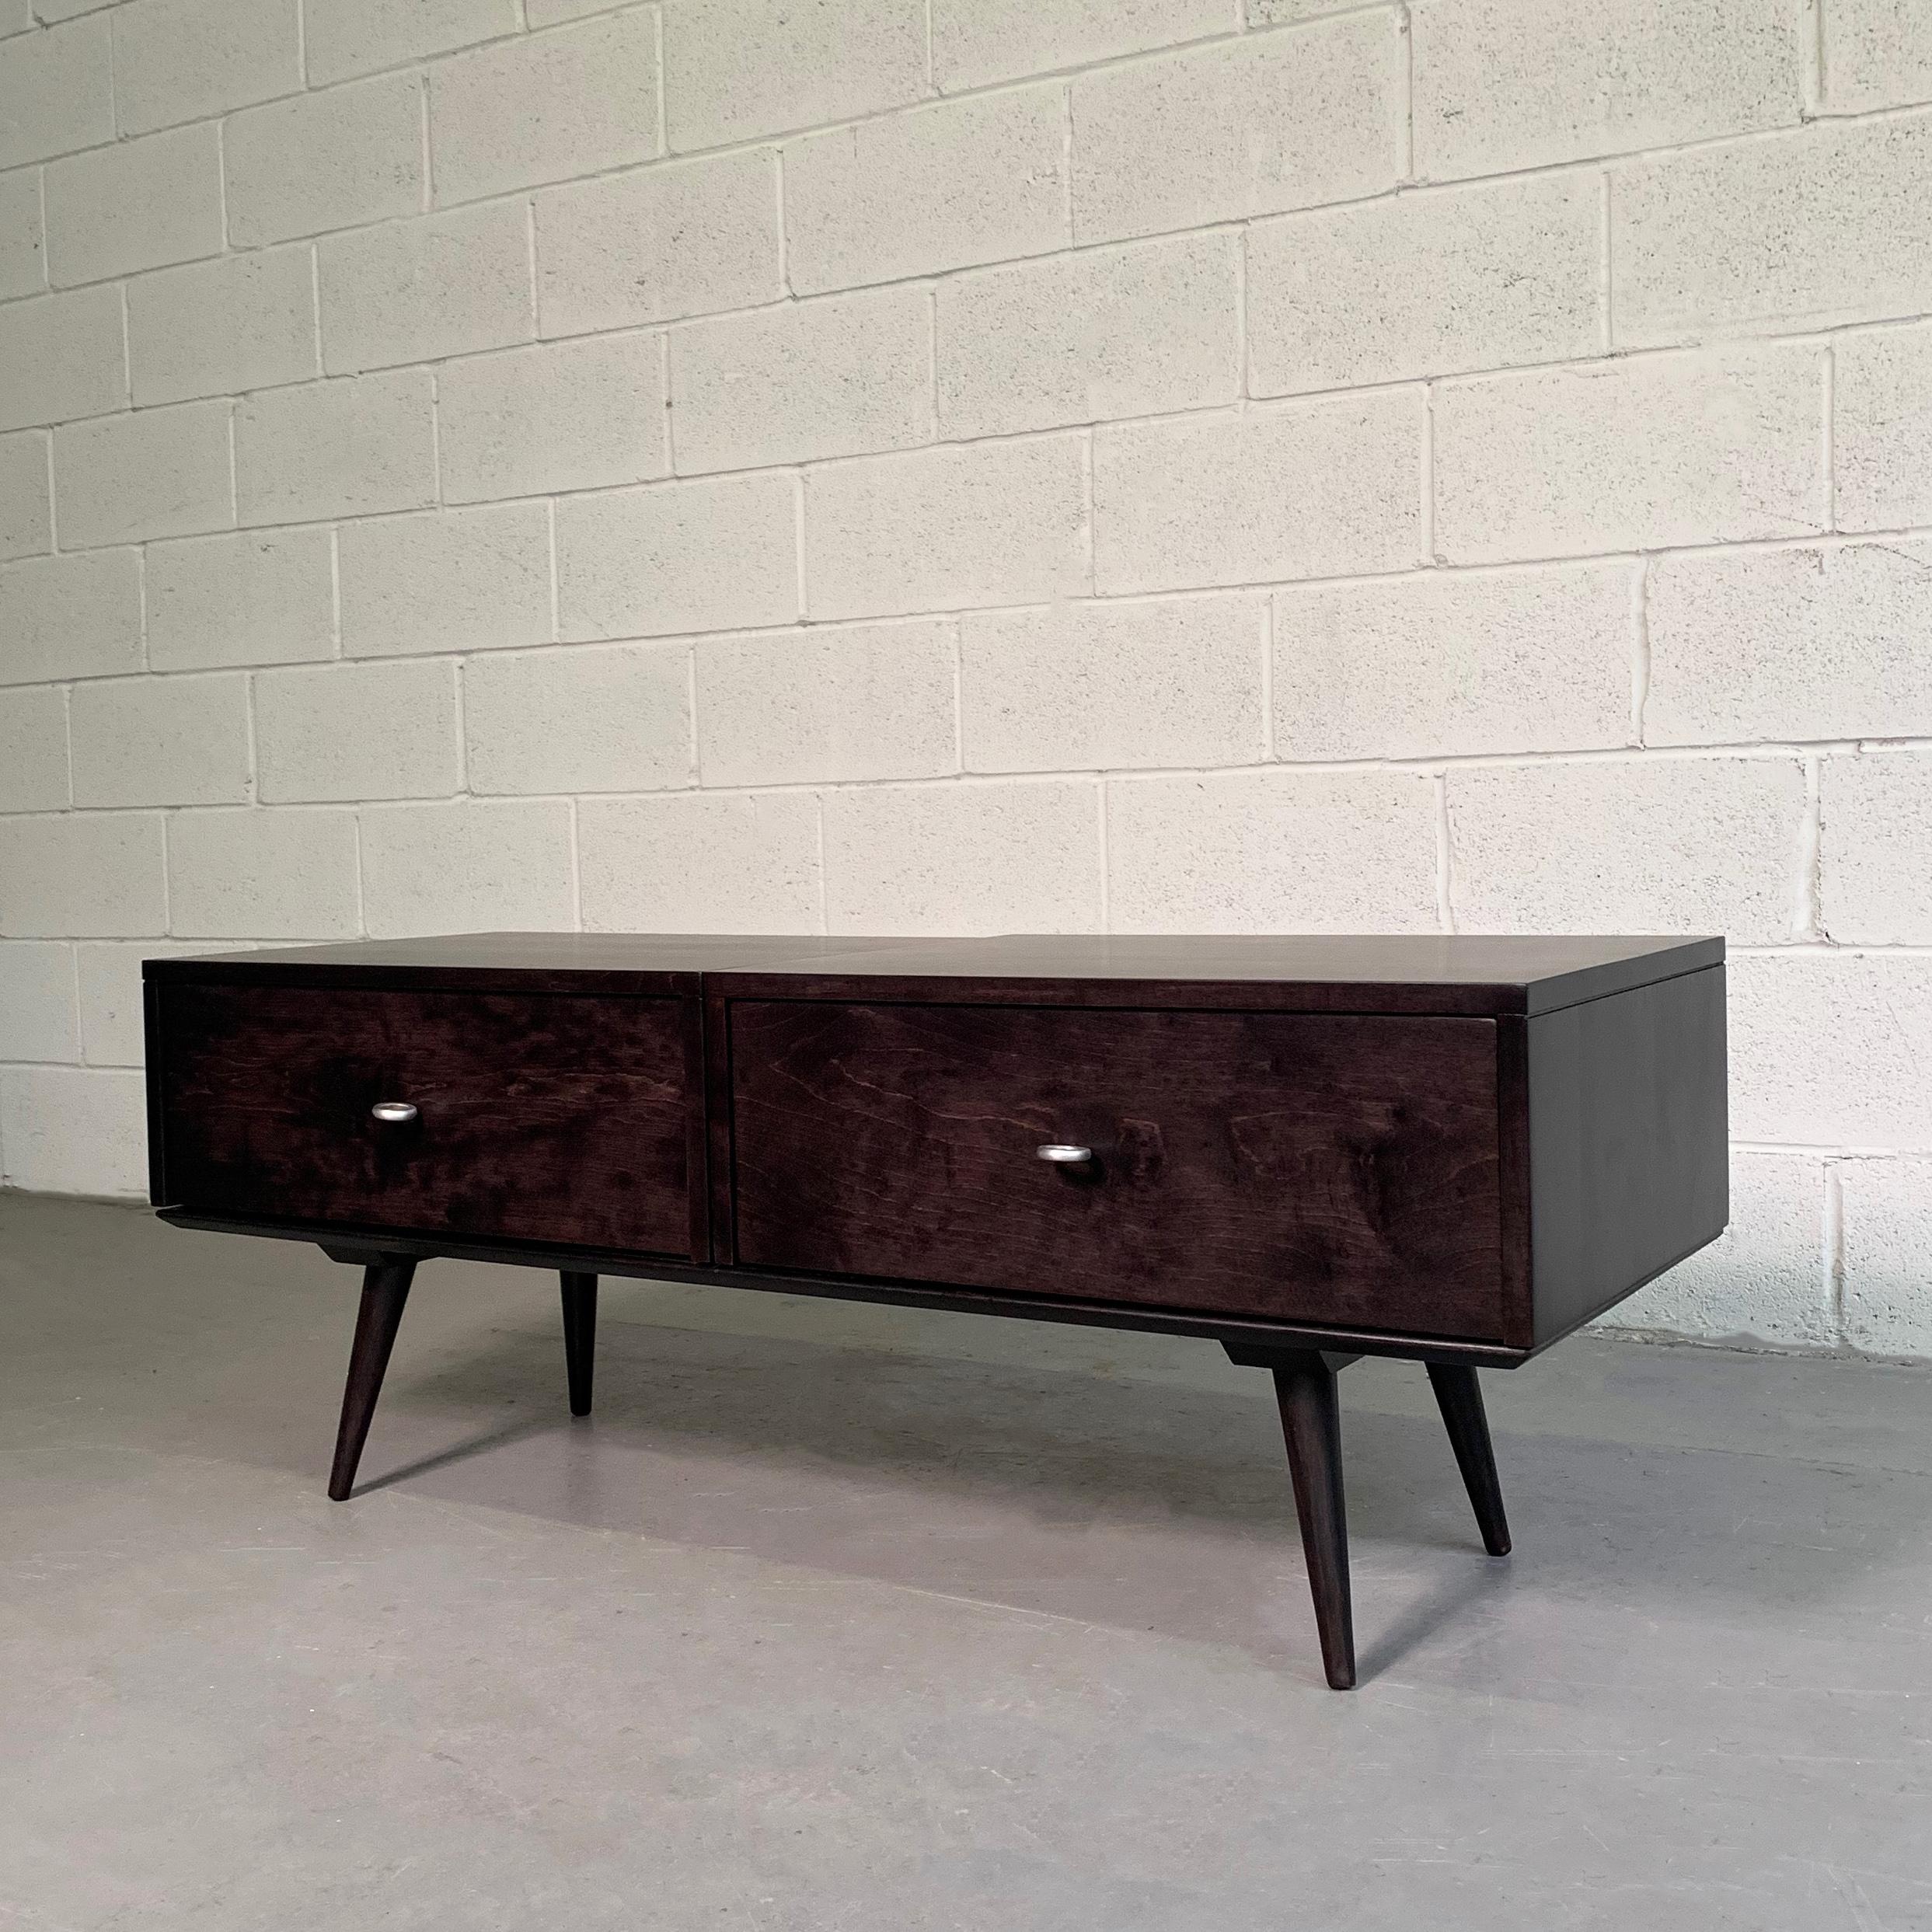 Mid-Century Modern, modular dresser system by Paul McCobb for Planner Group, Winchendon features two 24 x 18 x 8.5 inch dressers with signature aluminum ring pulls, that can be positioned side by side for 18.5